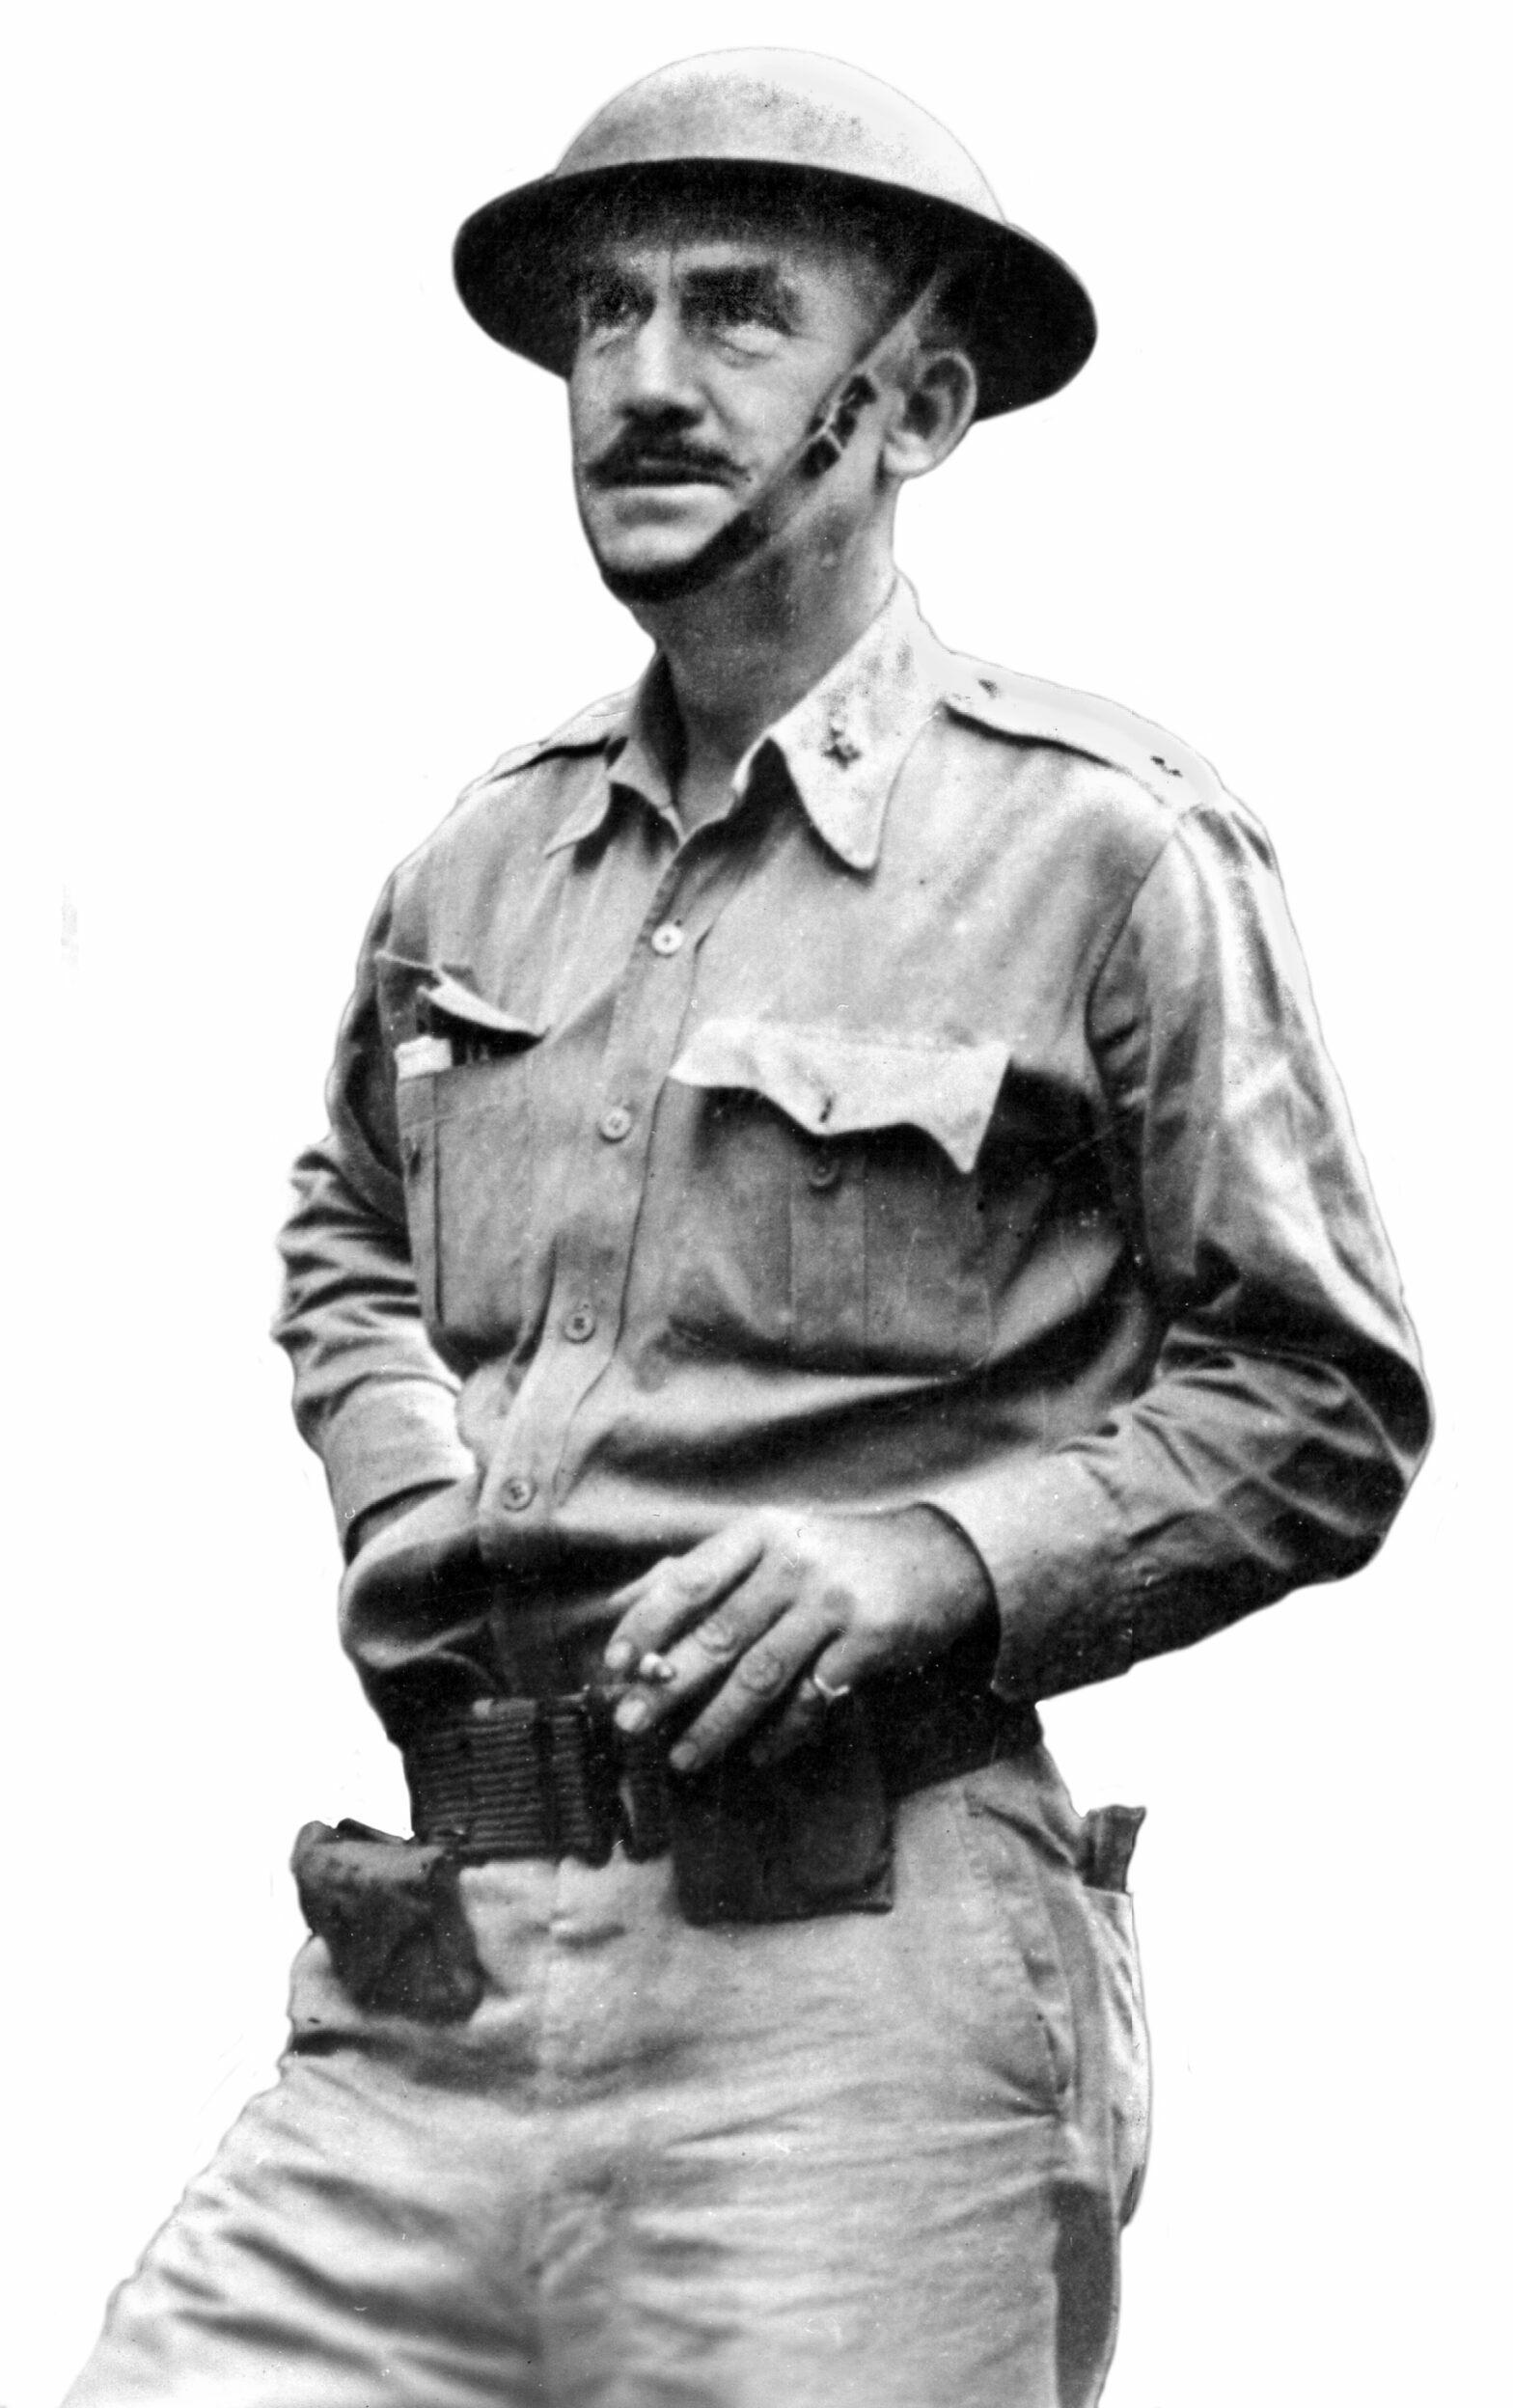 U.S. Army Lt. Col. Nick Galbraith photographed at the Bataan peninsula, January 1942. Although he was the logistics officer for the U.S. Forces in the Philippines, he was detailed by Lt. Gen. Jonathan Wainwright to try and convince 90,000 American-Philippines coalition troops scattered throughout the Philippines to surrender.